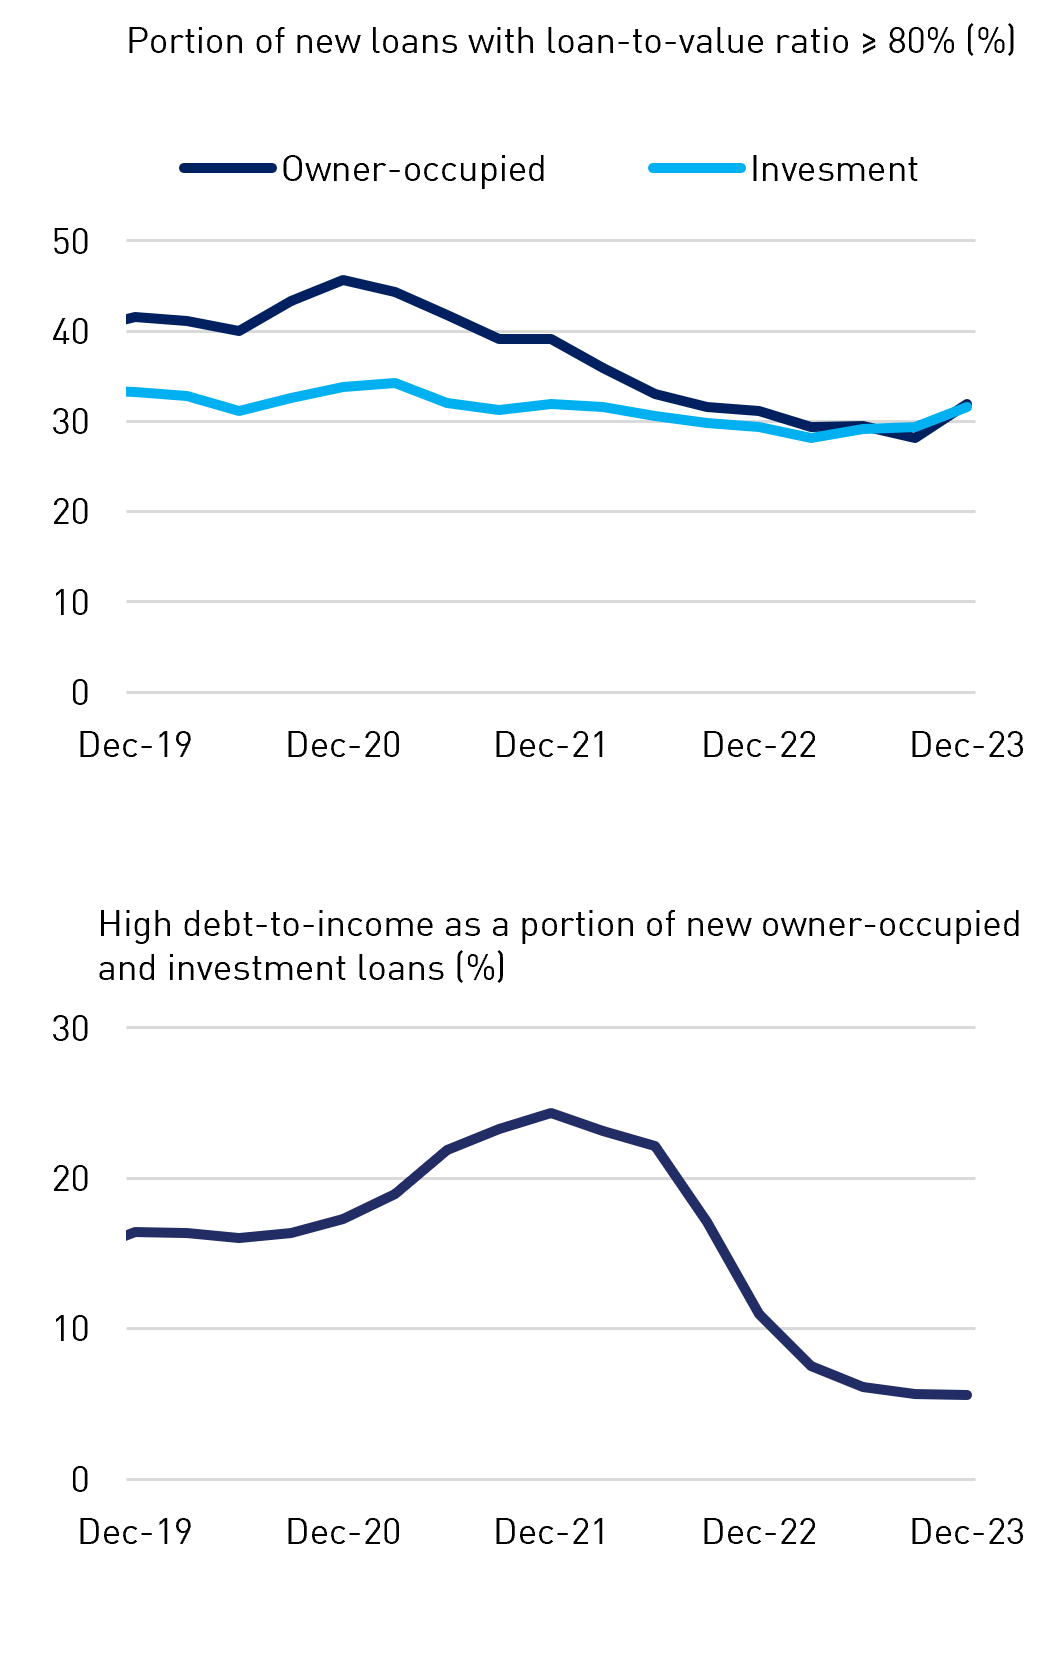 High debt-to-income as a portion of new owner-occupied and investment loans (%)